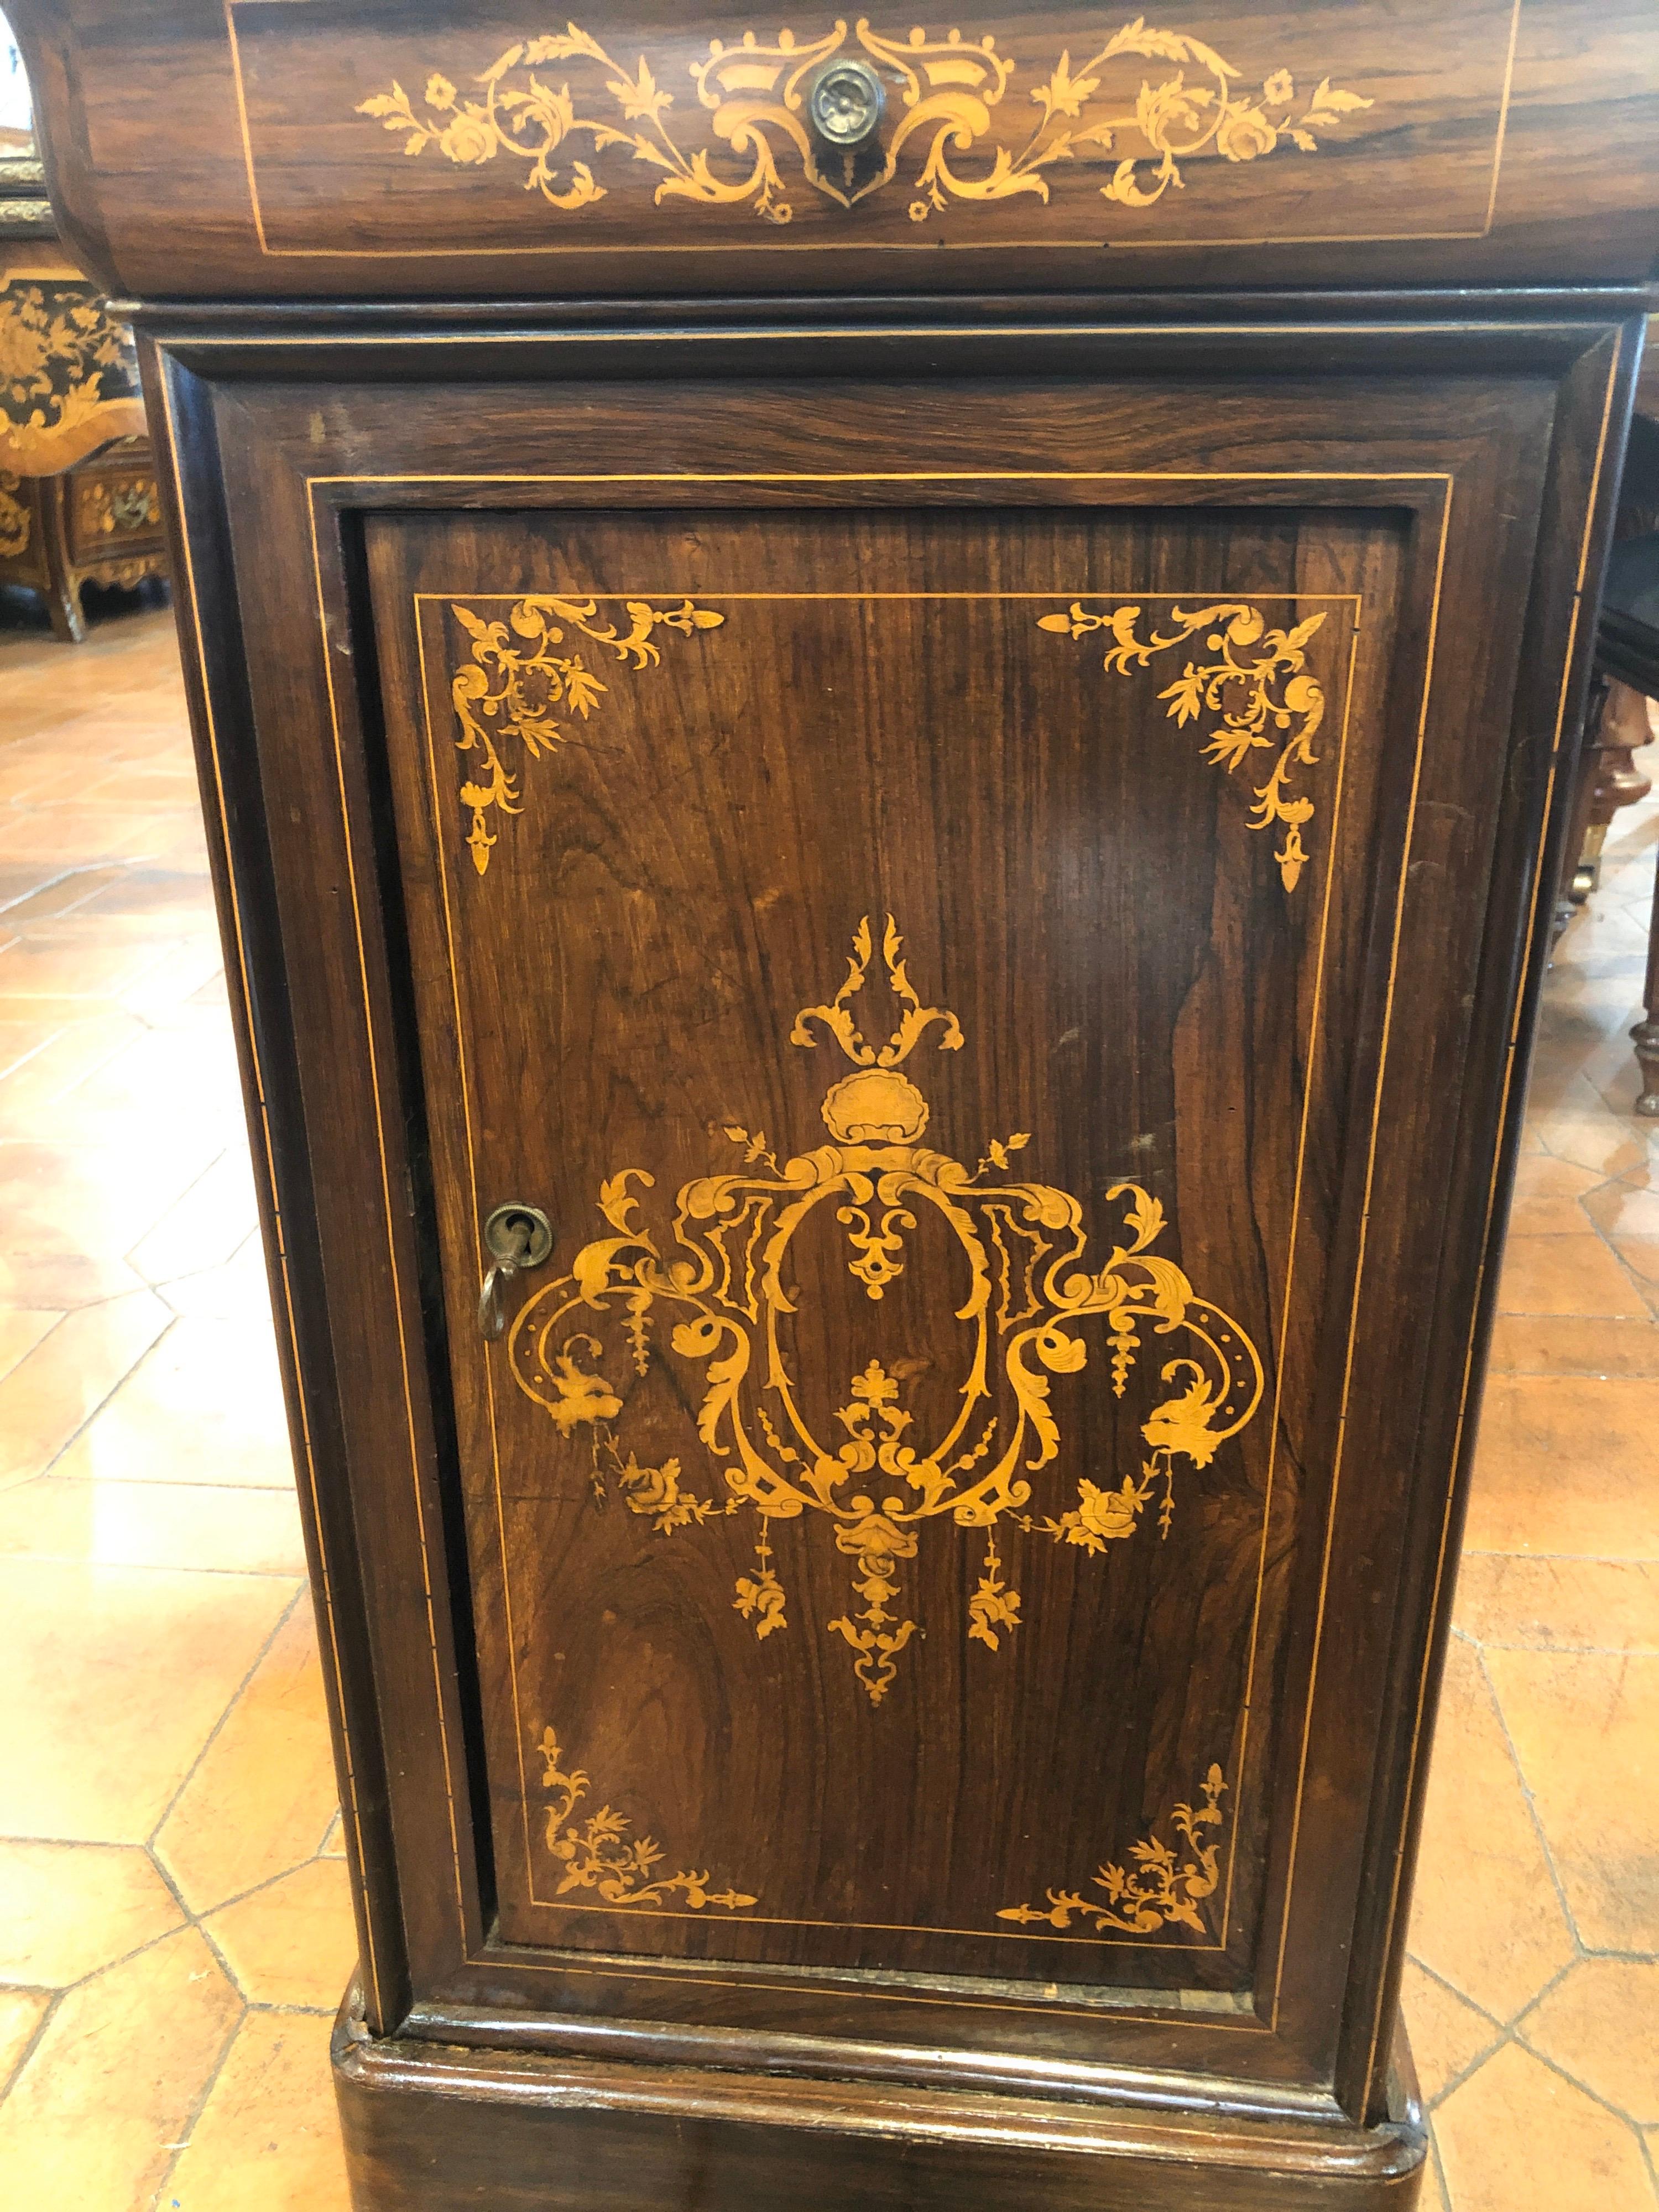 Fantastic bedside table from the French center, Paris, Charles X, circa 1820, in rosewood and finely inlaid in boxwood.
Original marble and in good state of conservation.
Of this is available chest of drawers, secretaire, mirror and bed ... soon